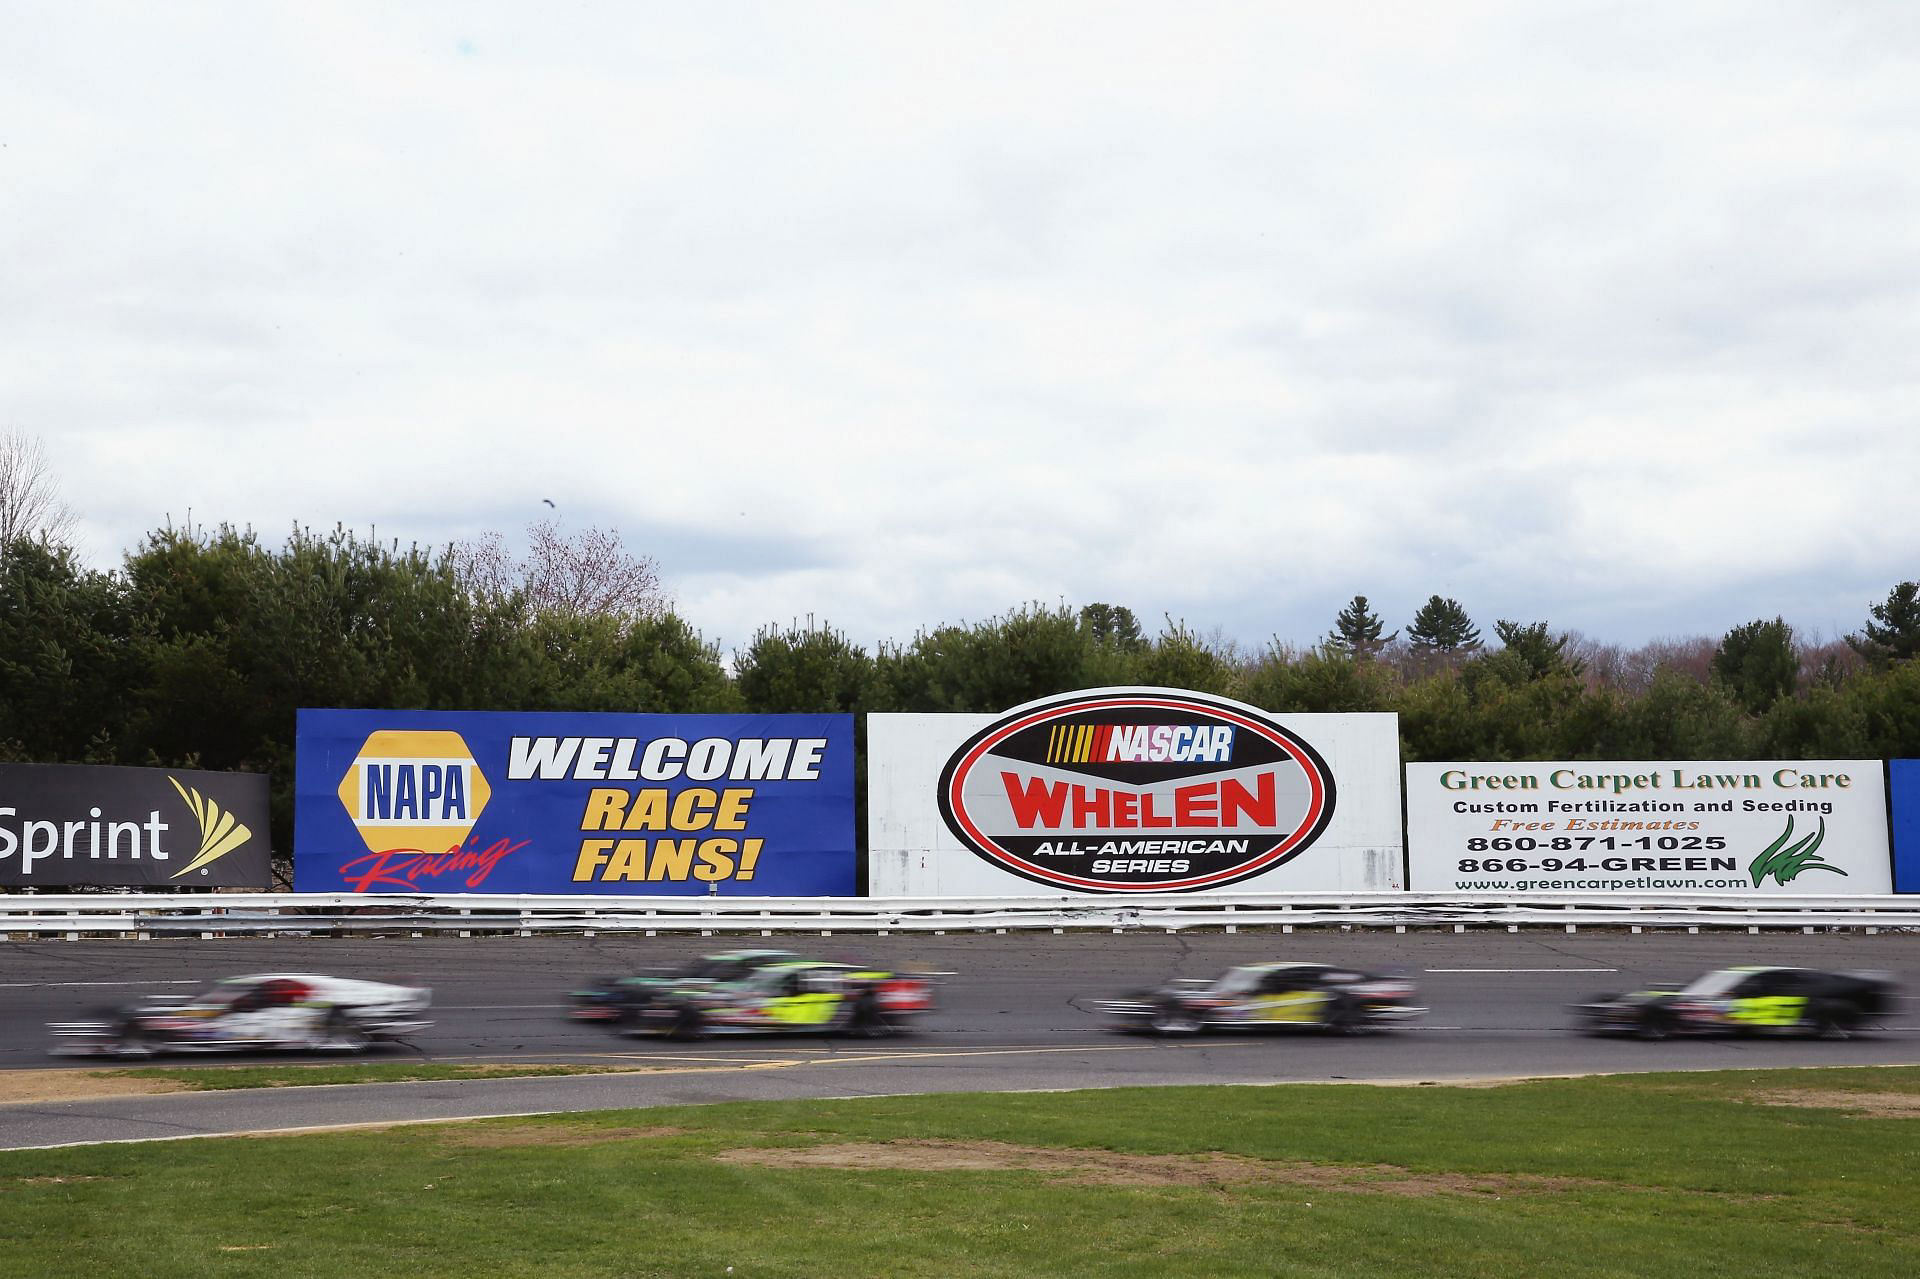 Full race results of NASCAR Whelen Modified Tour race at Martinsville